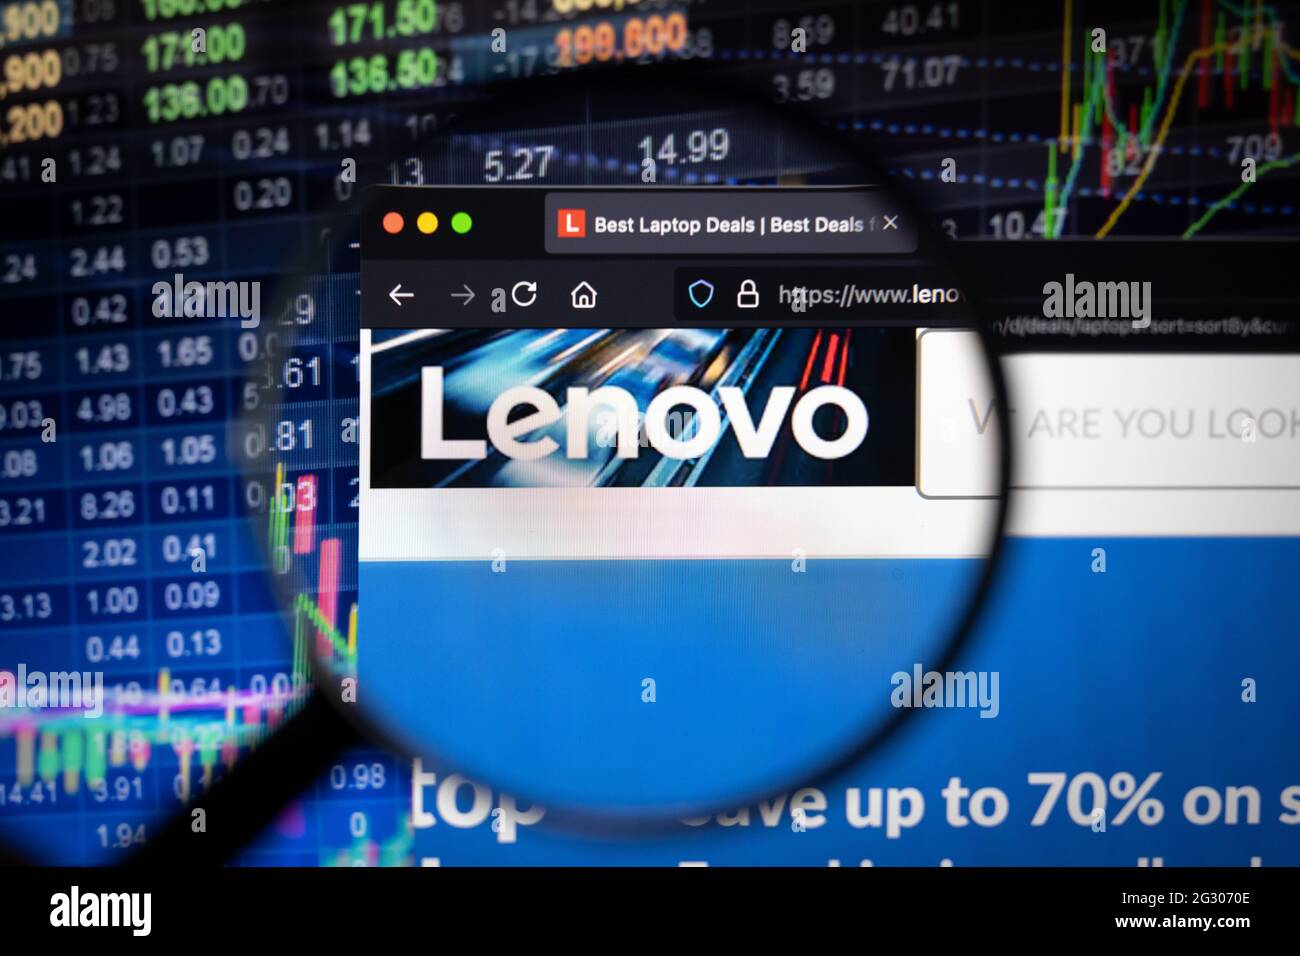 Lenovo company logo on a website with blurry stock market developments in the background, seen on a computer screen through a magnifying glass Stock Photo